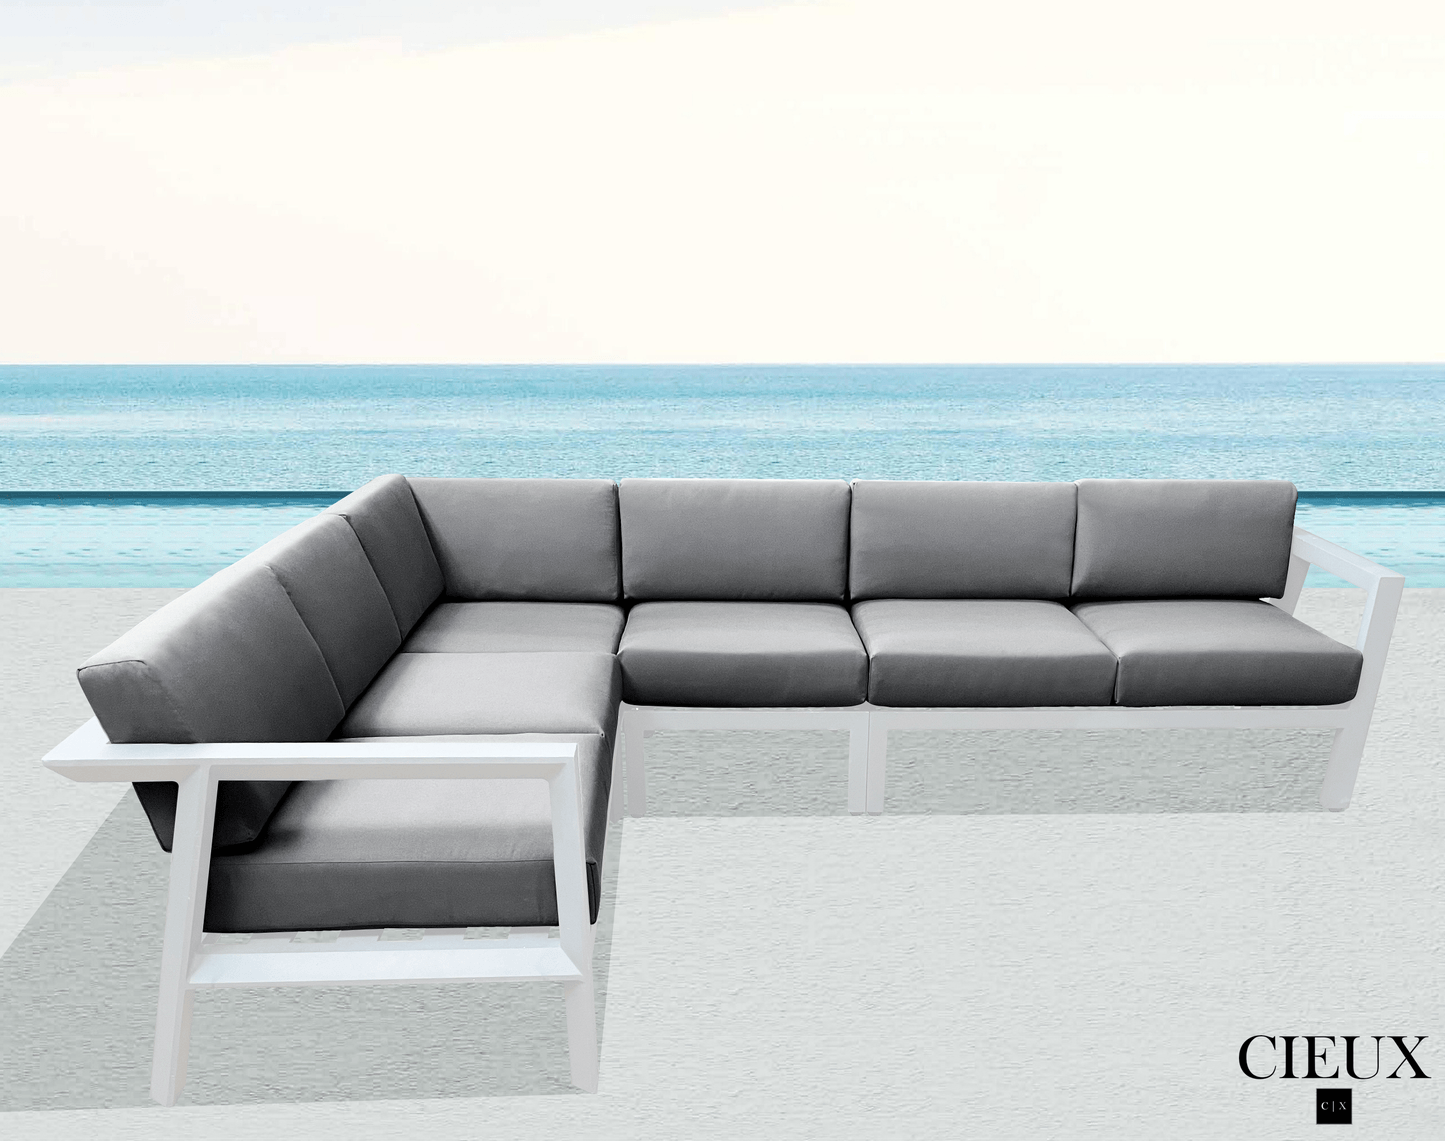 Corsica Outdoor Patio Aluminum Metal L-Shaped Sectional Sofa in White with Sunbrella Cushions - Available in 2 Colours